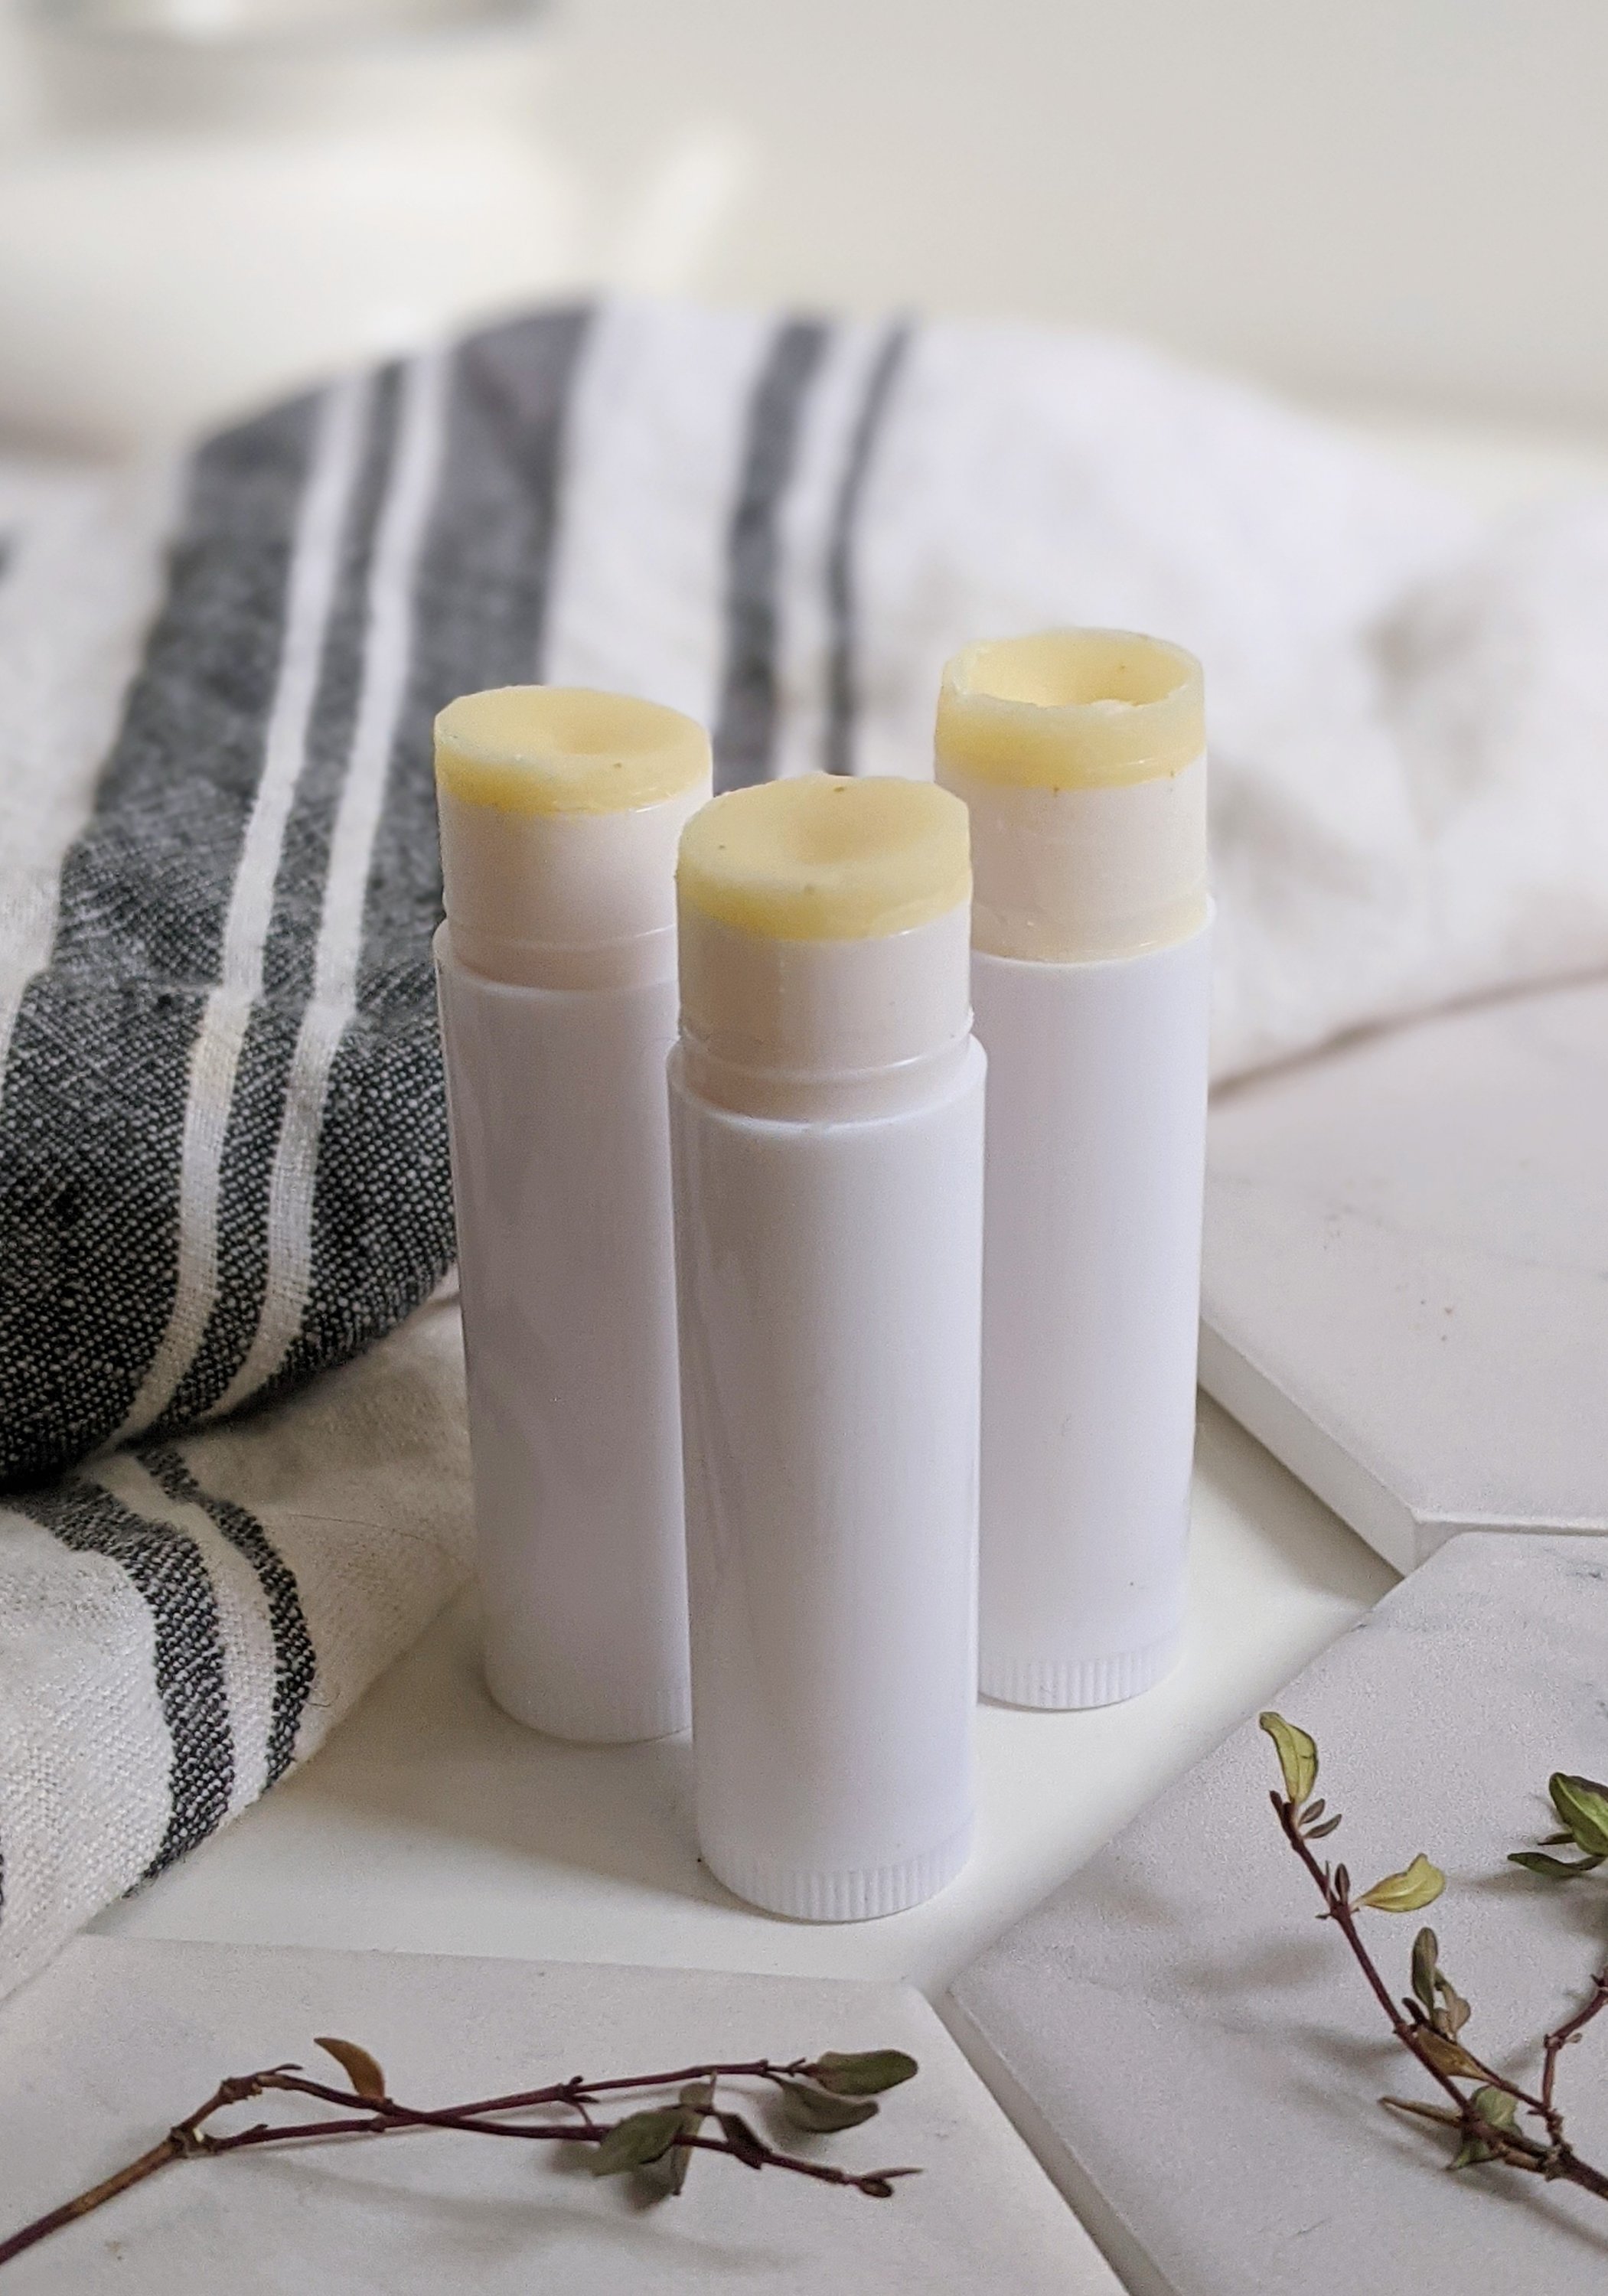 diy beeswax lip balm at home with a kit and simple natural ingredients vitamin e for soft lips and natural uses for beeswax recipes homemade healthy burts bees copycat recipe copy cat at home